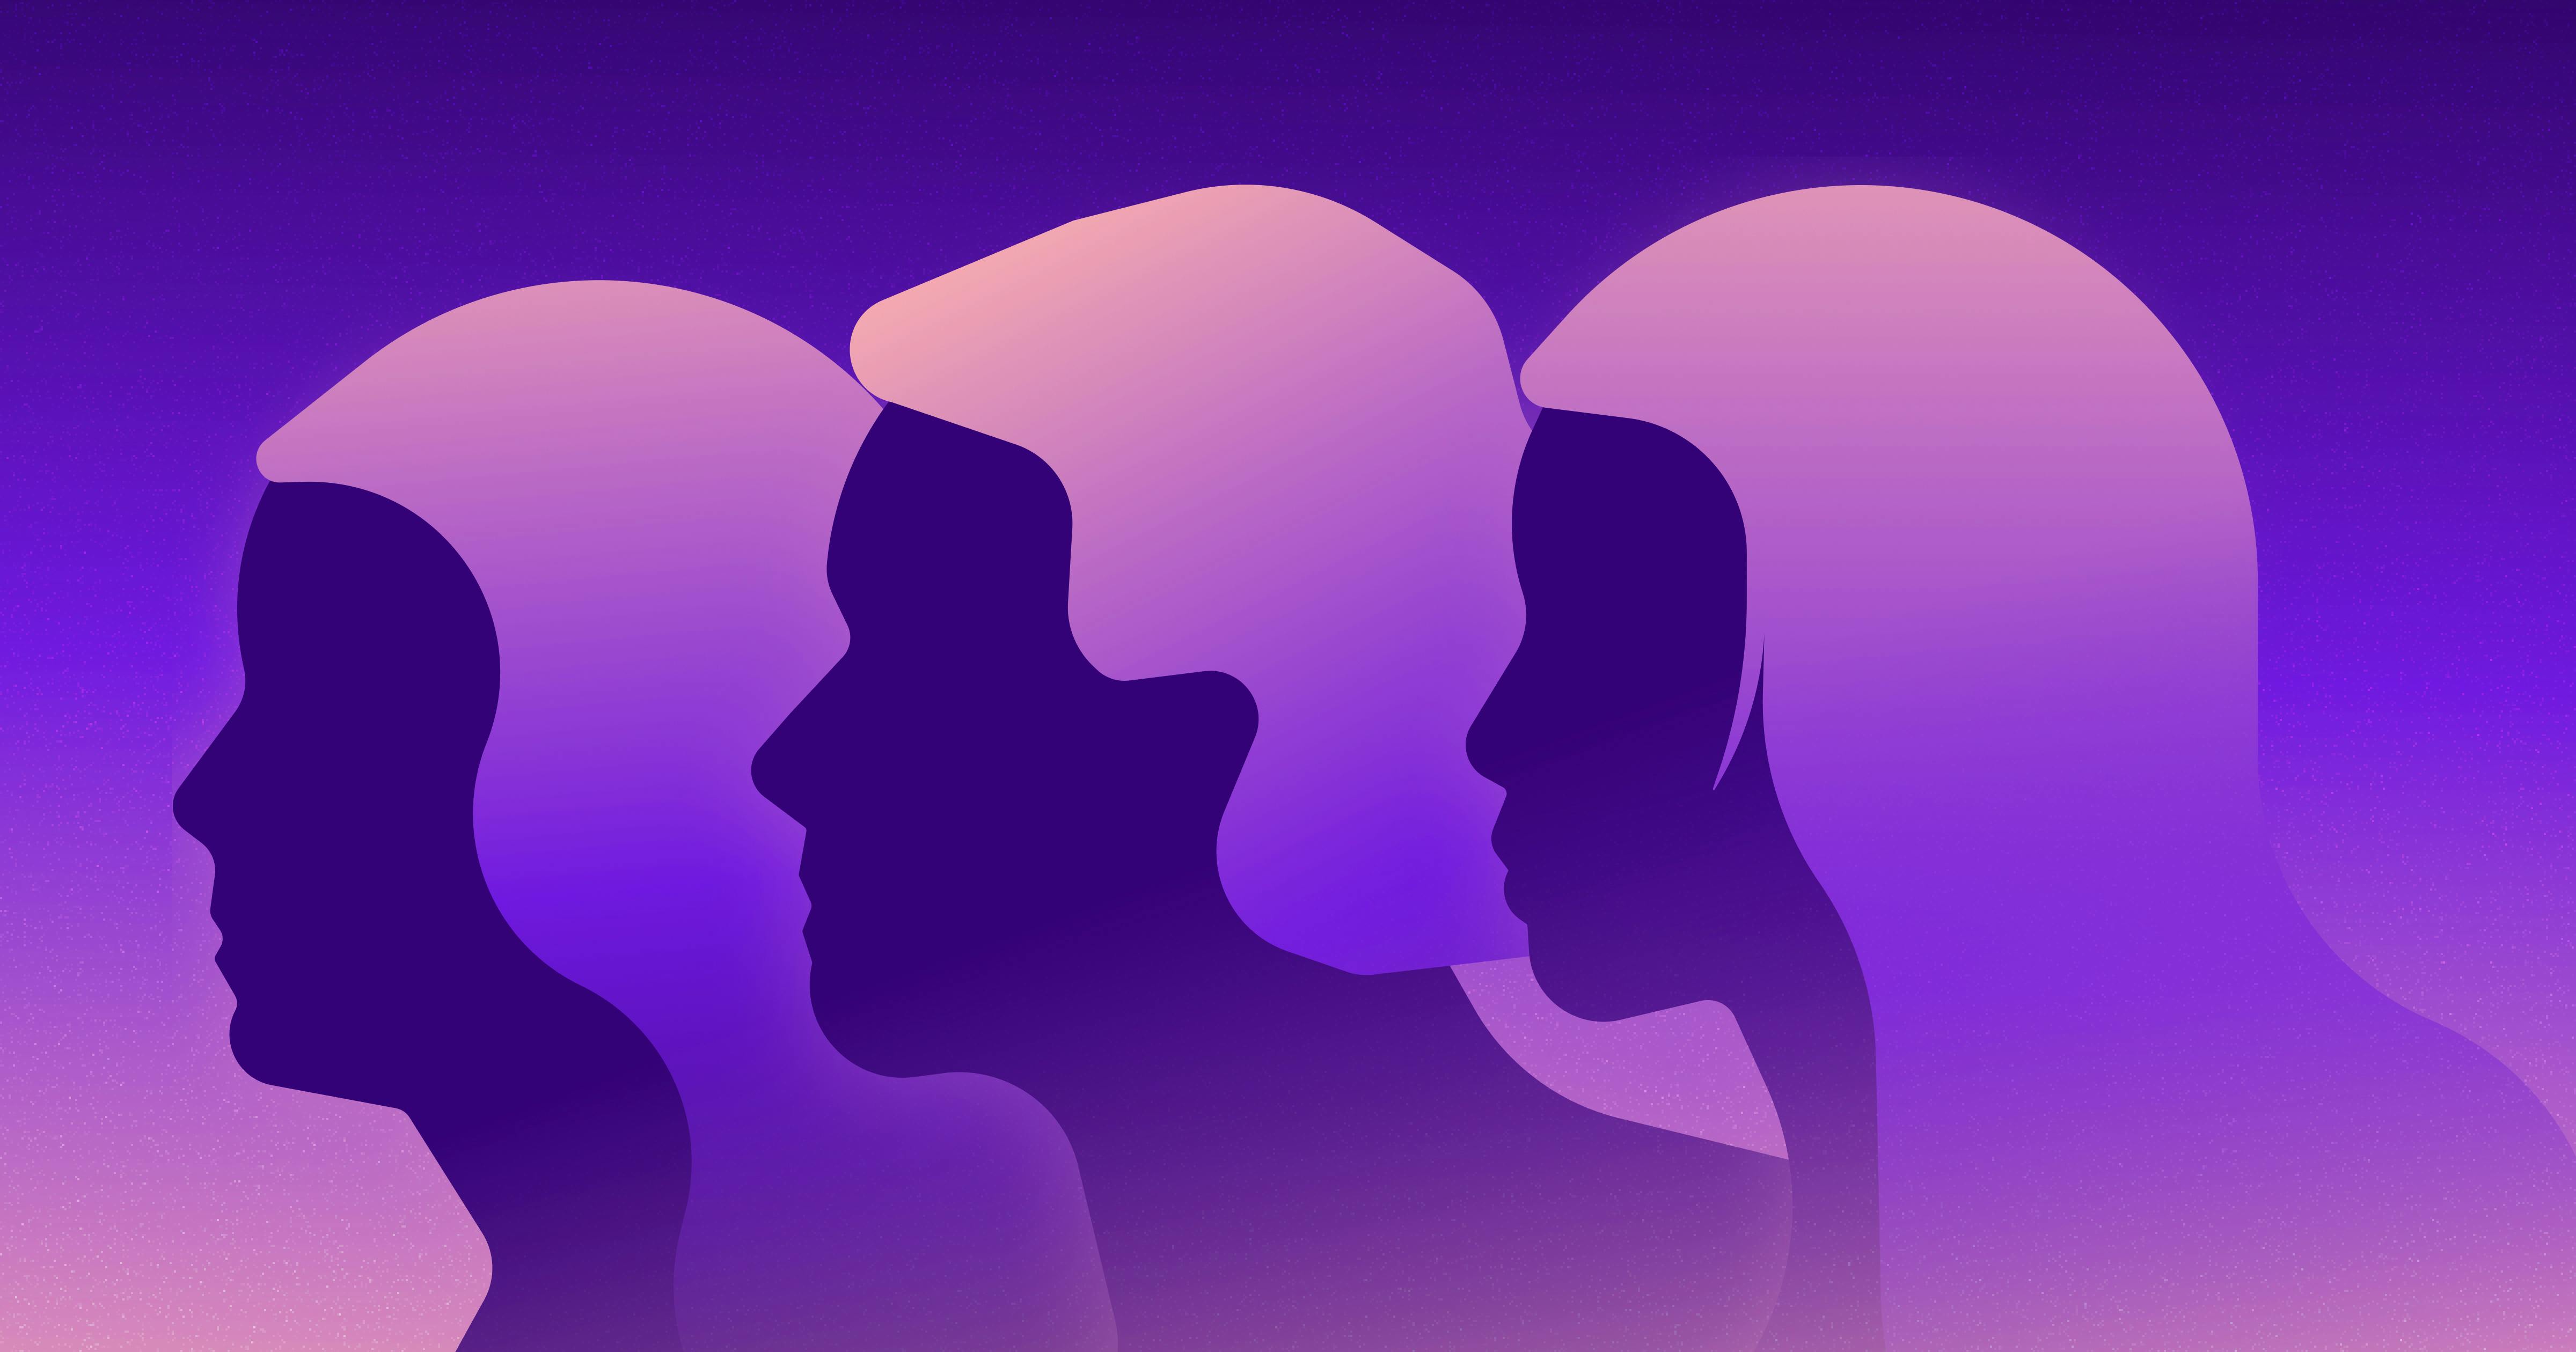 Purple silhouettes of three people looking to the right.